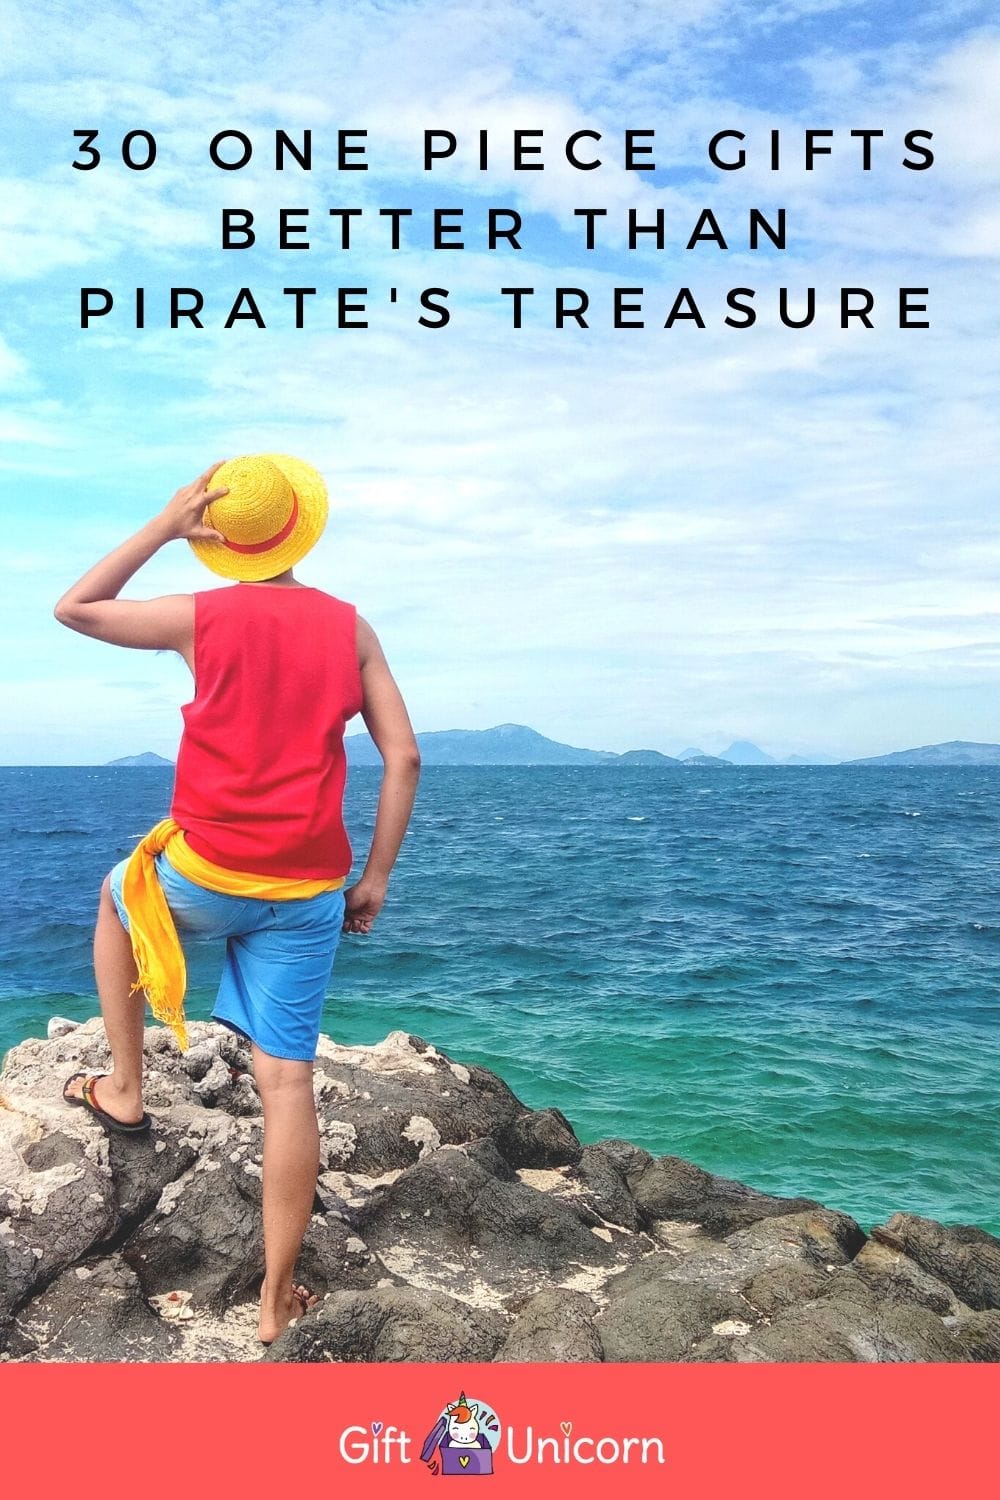 30 One Piece Gifts Better than Pirate’s Treasure - pinterest pin image